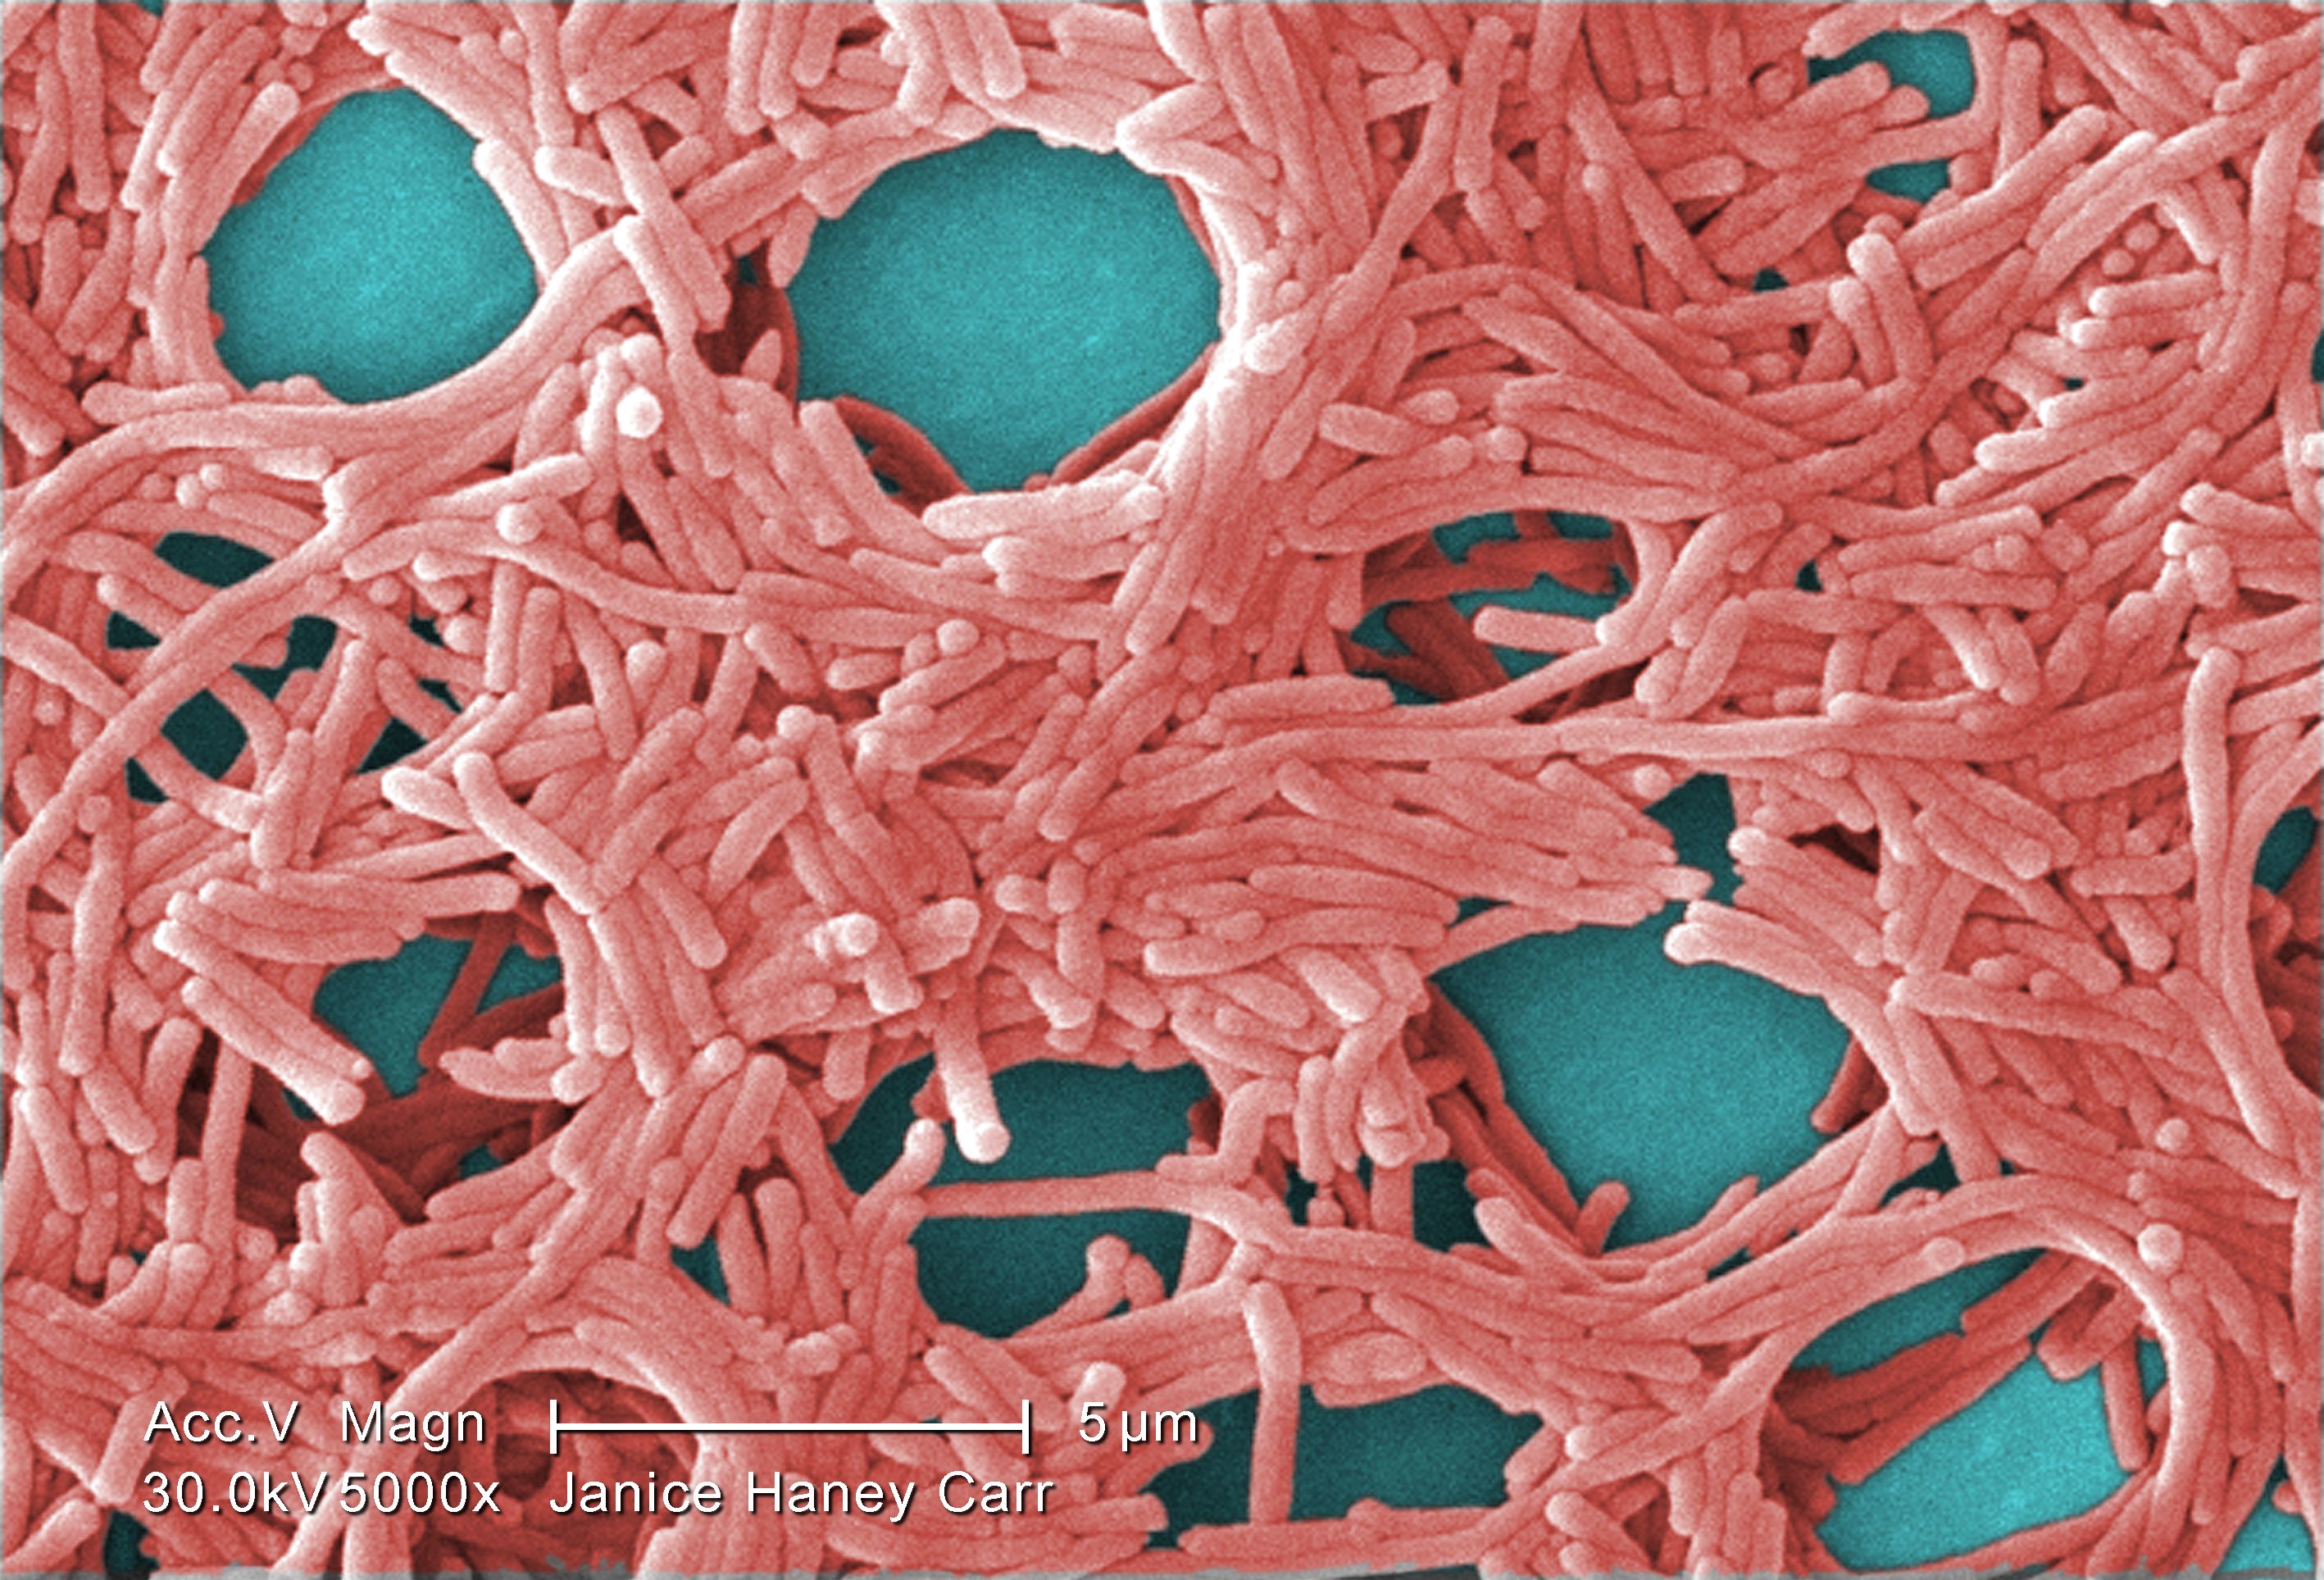 2009 Margaret Williams, PhD; Claressa Lucas, PhD;Tatiana Travis, BS Under a moderately-high magnification of 5000X, this colorized scanning electron micrograph (SEM) depicted a large grouping of Gram-negative Legionella pneumophila bacteria. Please see PHIL 11092 through 11154 for additional SEMs of these organisms, specifically PHIL 11147 for a black and white version of this image. Of particular importance, is the presence of polar flagella, and pili, or long streamers, which due to their fragile nature, in some of these views seem to be dissociated from any of the bacteria. Youll note that a number of these bacteria seem to display an elongated-rod morphology. L. pneumophila are known to most frequently exhibit this configuration when grown in broth, however, they can also elongate when plate-grown cells age, as it was in this case, especially when theyve been refrigerated. The usual L. pneumophila morphology consists of stout, fat bacilli, which is the case for the vast majority of the organisms depicted here. These bacteria originated on a 1 week-old culture plate (+/- 1 day), which had incubated a single colony, at 37?C upon a buffered charcoal yeast extract (BCYE) medium with no antibiotics.